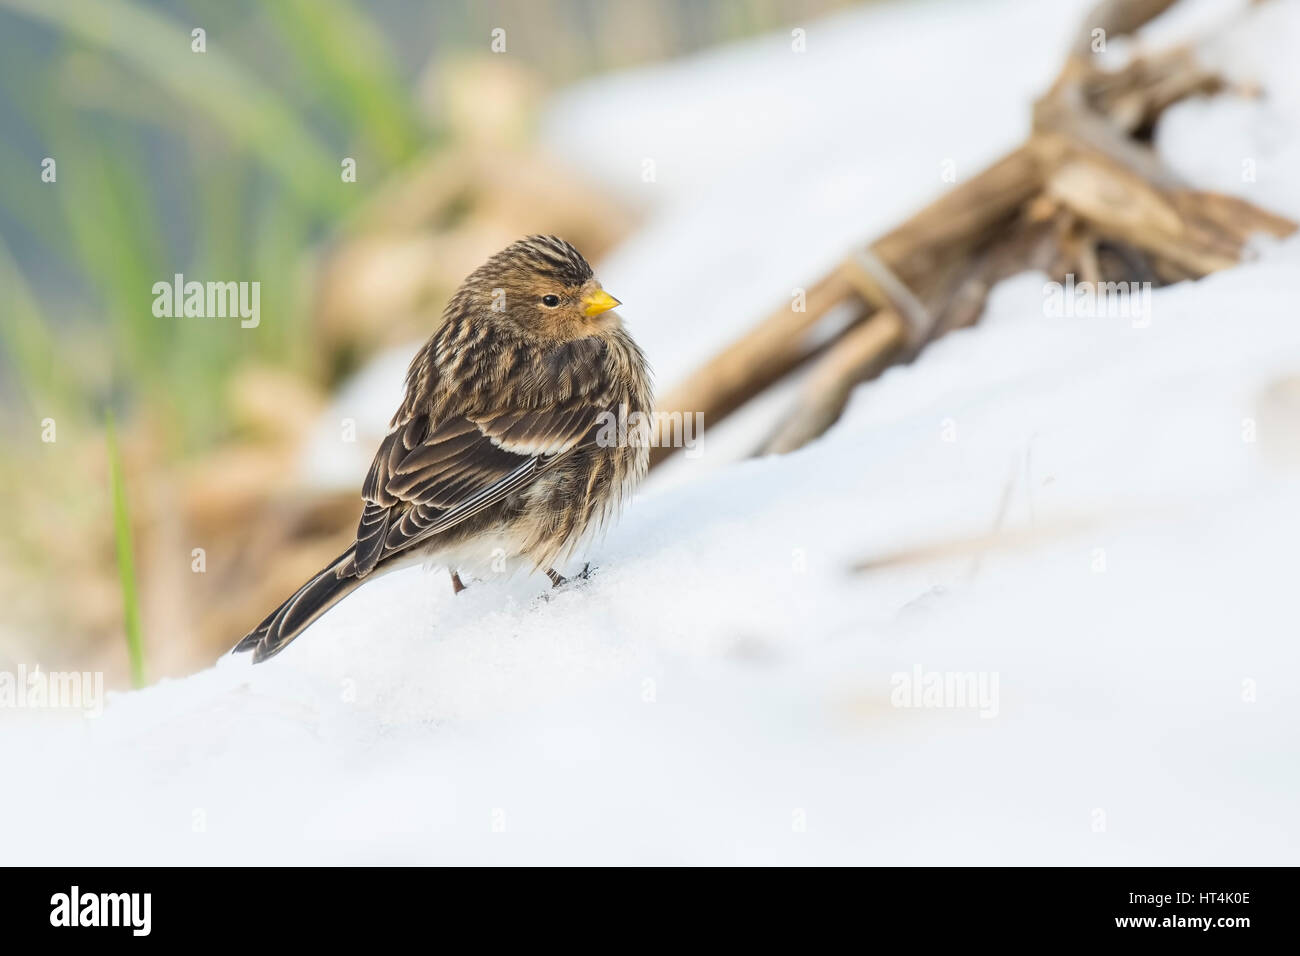 Closeup of a Twite (Carduelis flavirostris) during winter season in snow. A twite is a small brown passerine bird in the finch family Fringillidae. Stock Photo